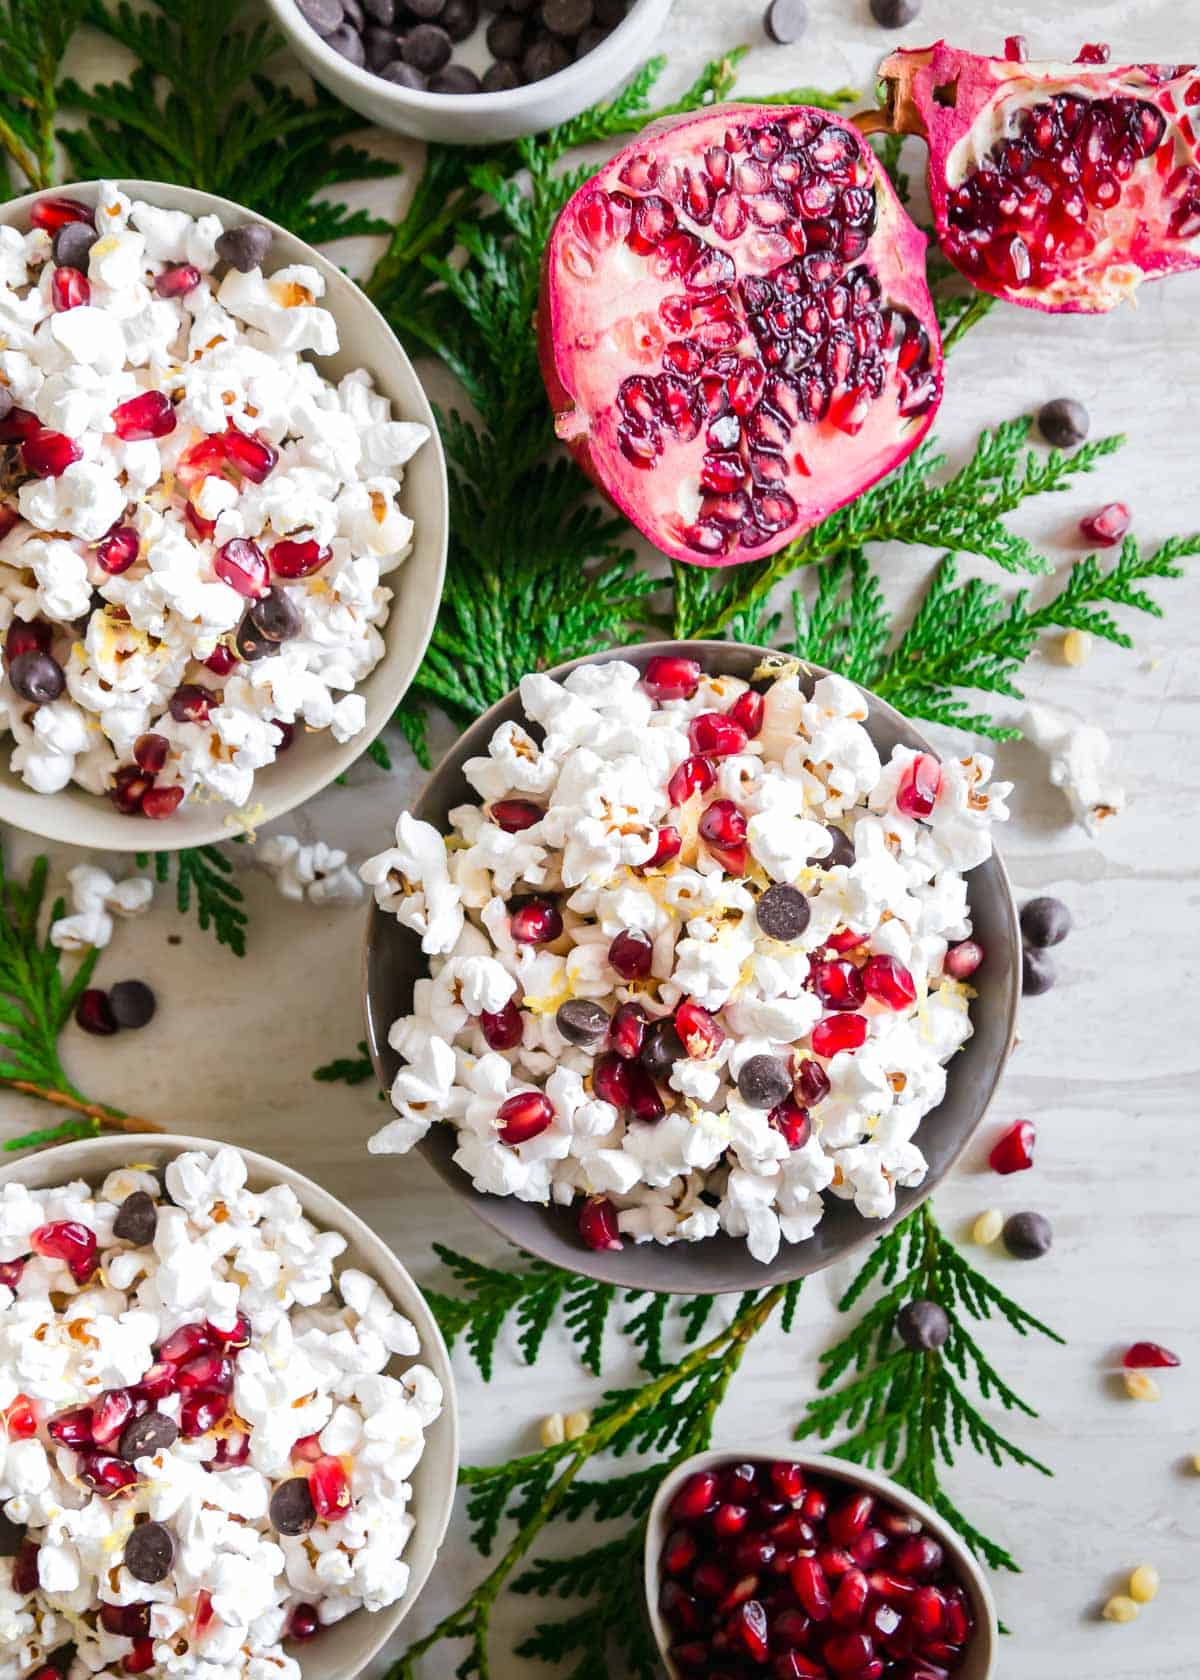 Enjoy this winter snack mix of popcorn, pomegranates, chocolate chips and lemon zest as a deliciously easy snack or dessert this season!